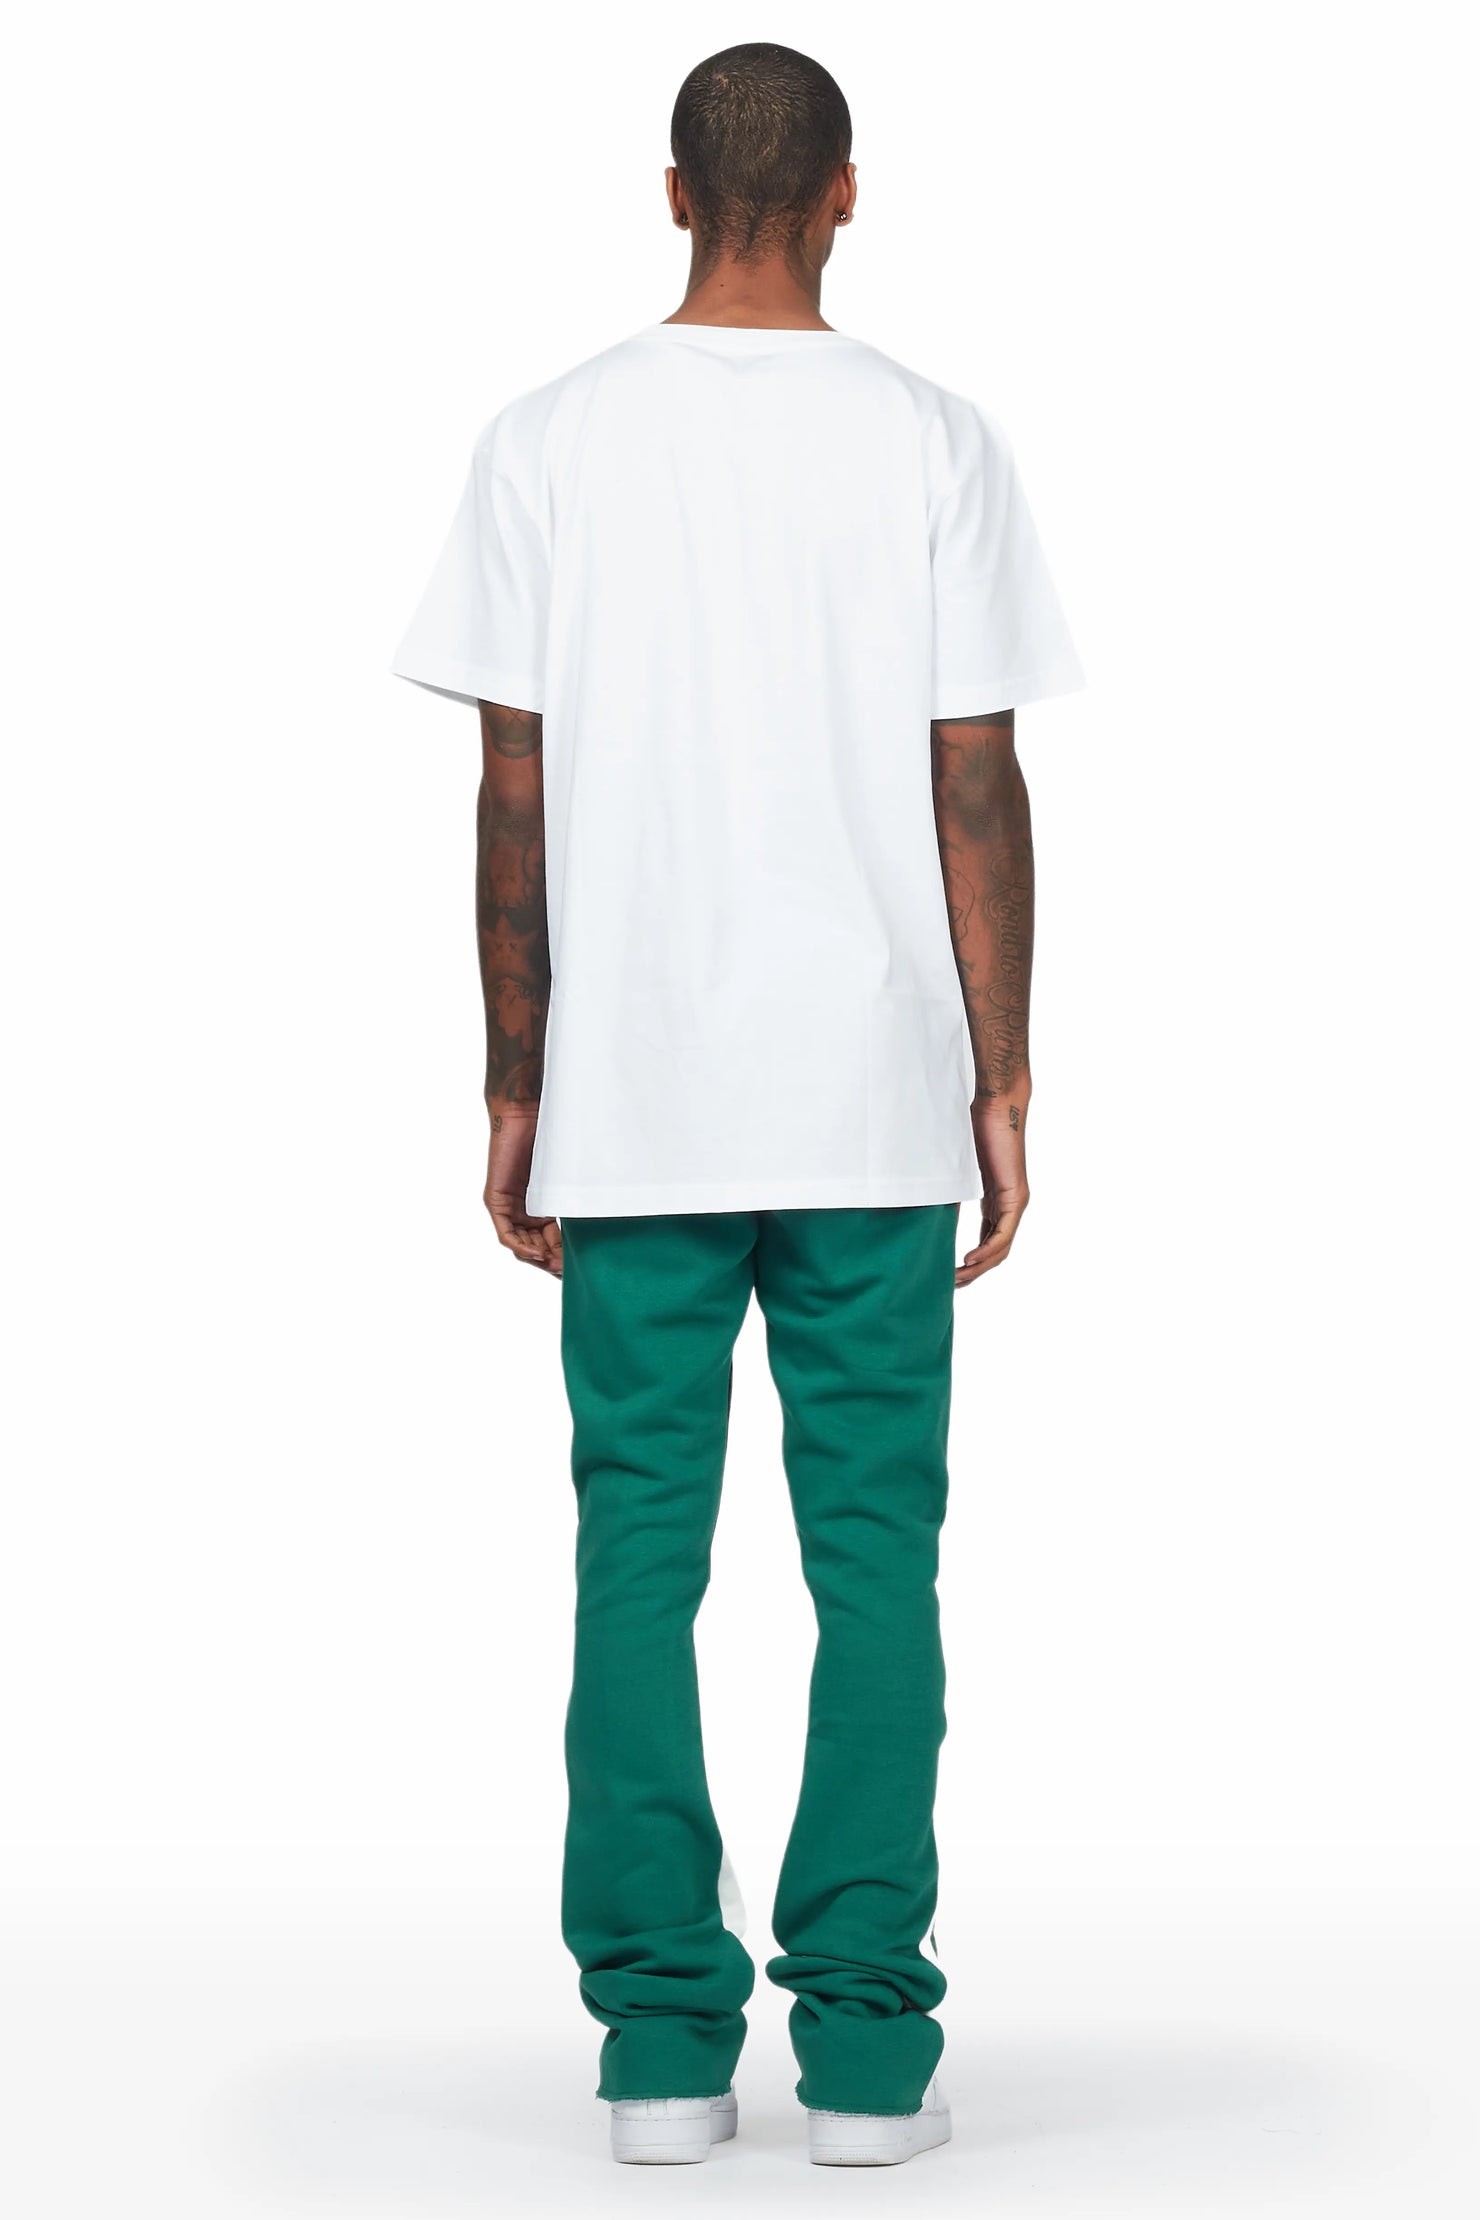 Kalibre White/Green T-Shirt Stacked Flare Track Set